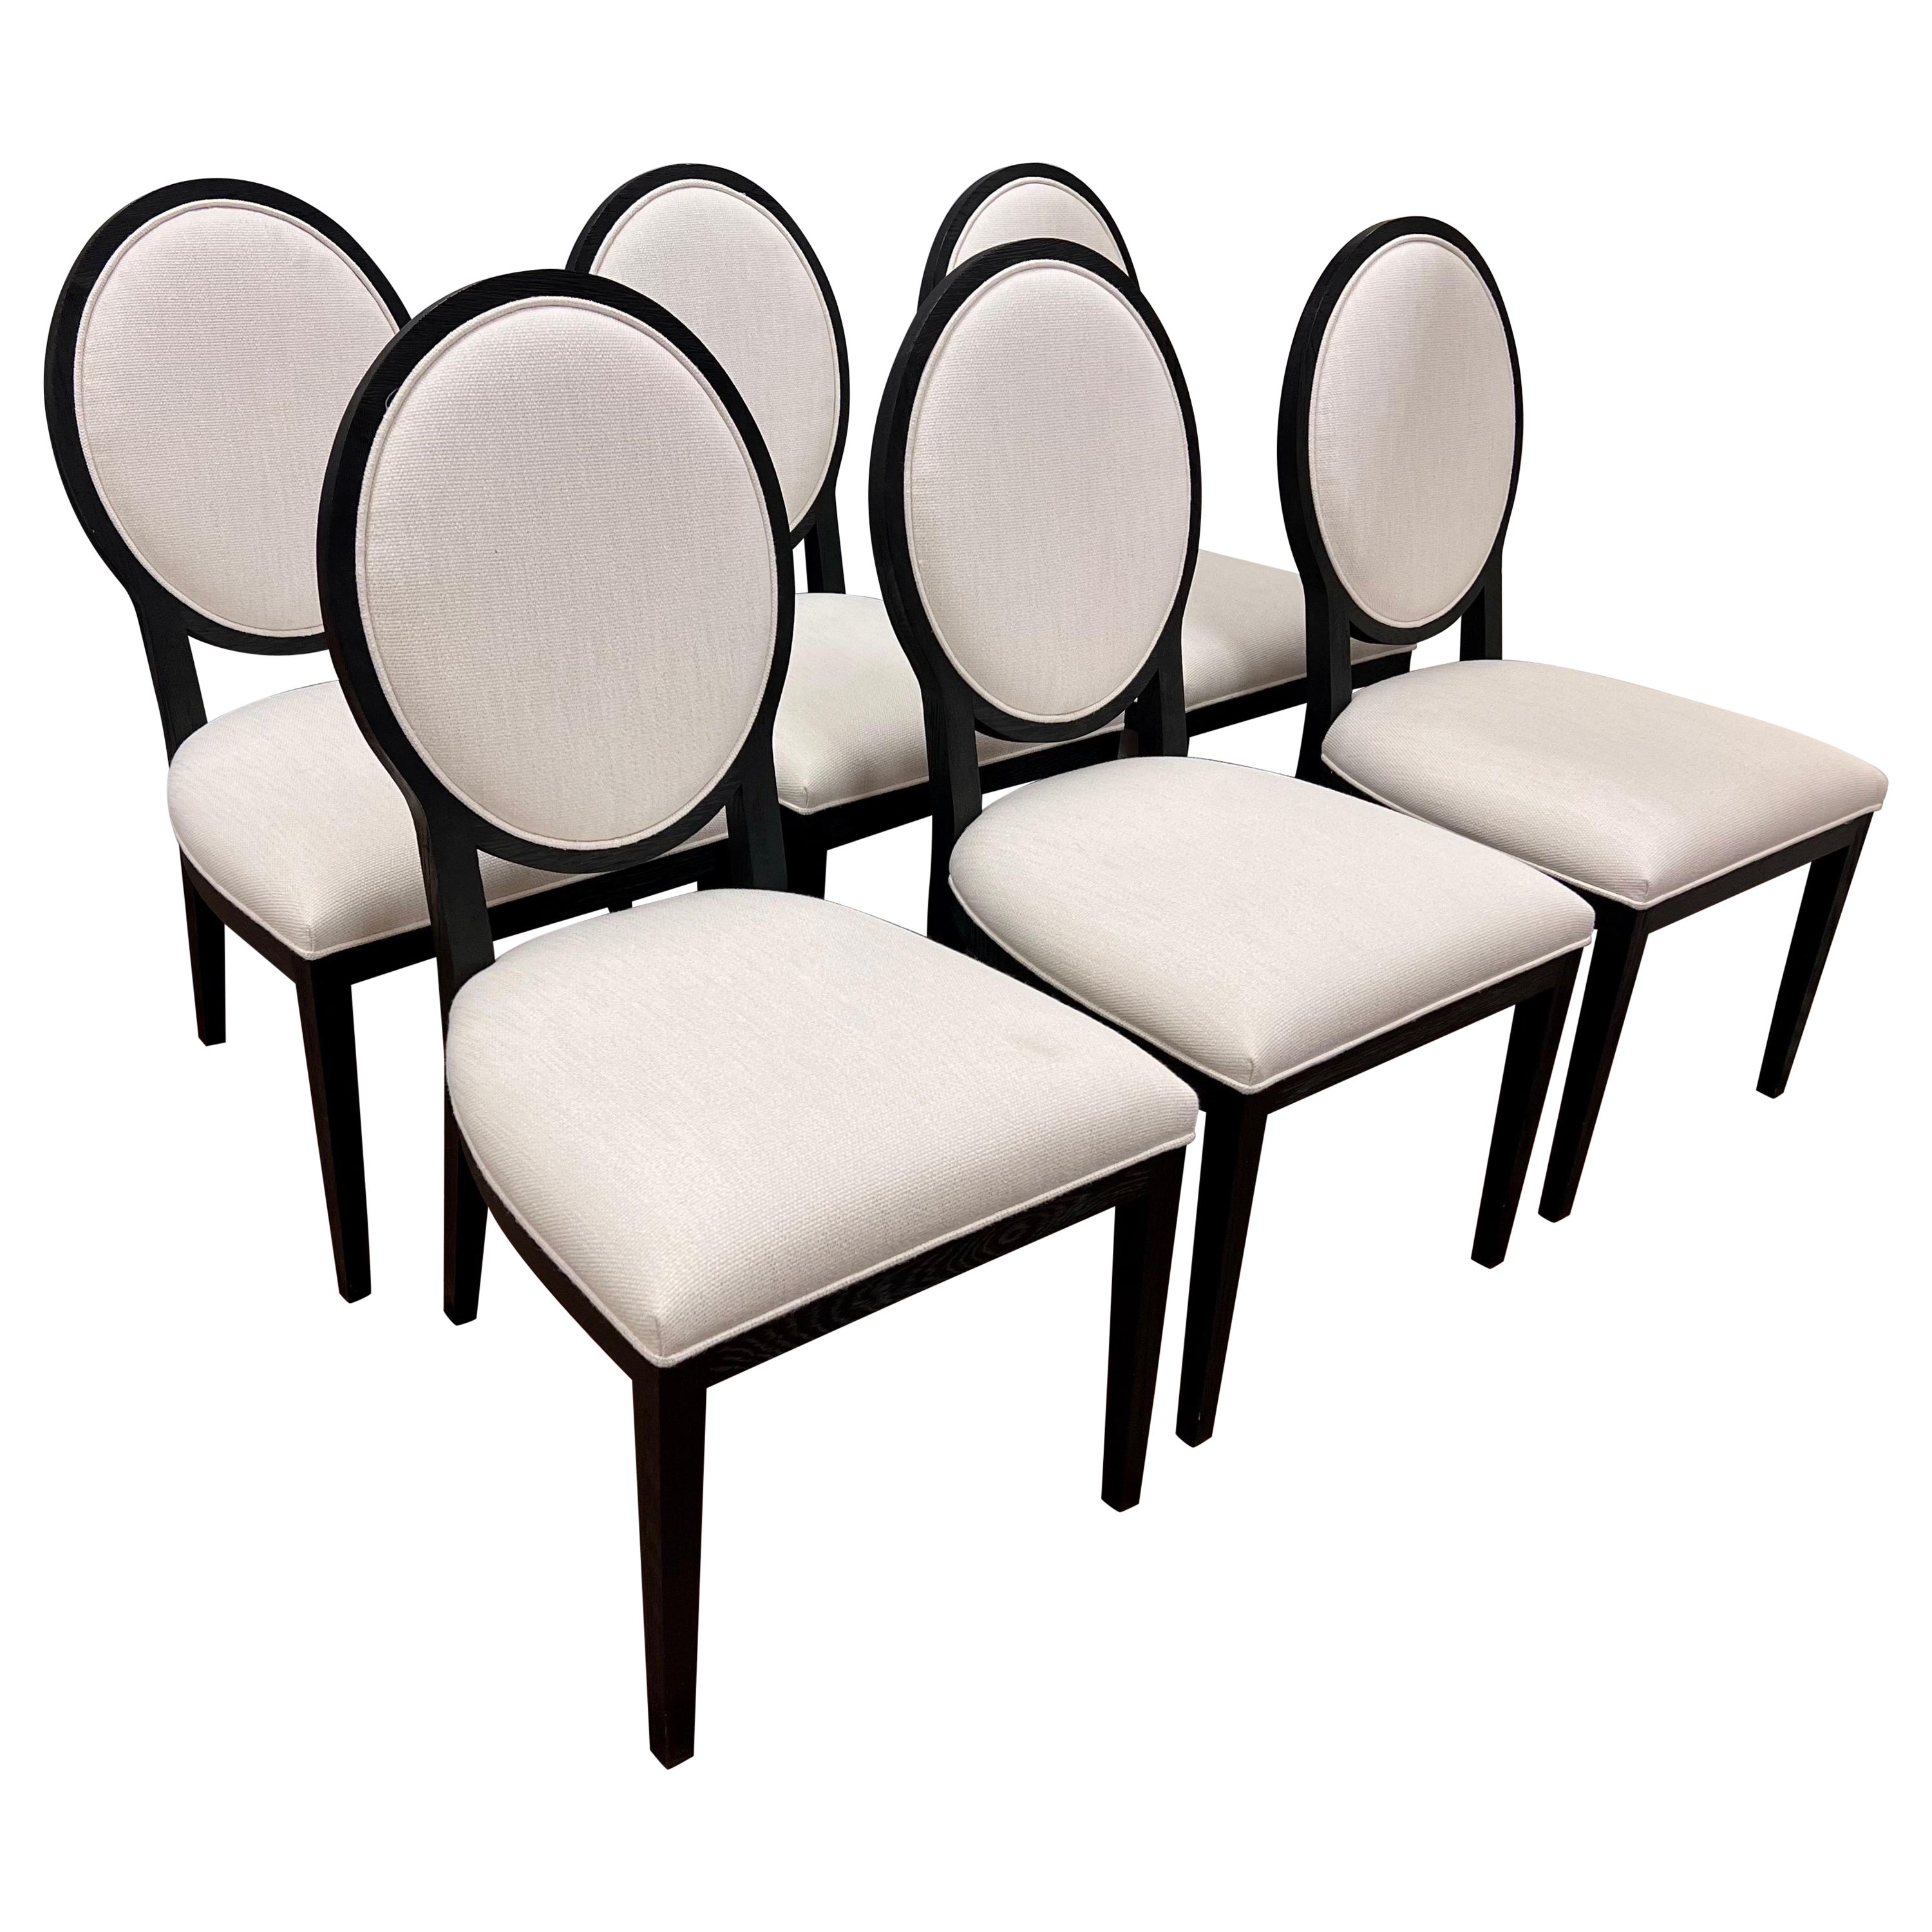 Restoration Hardware Oval Back Linen Dining Chairs, Set of 6 For Sale